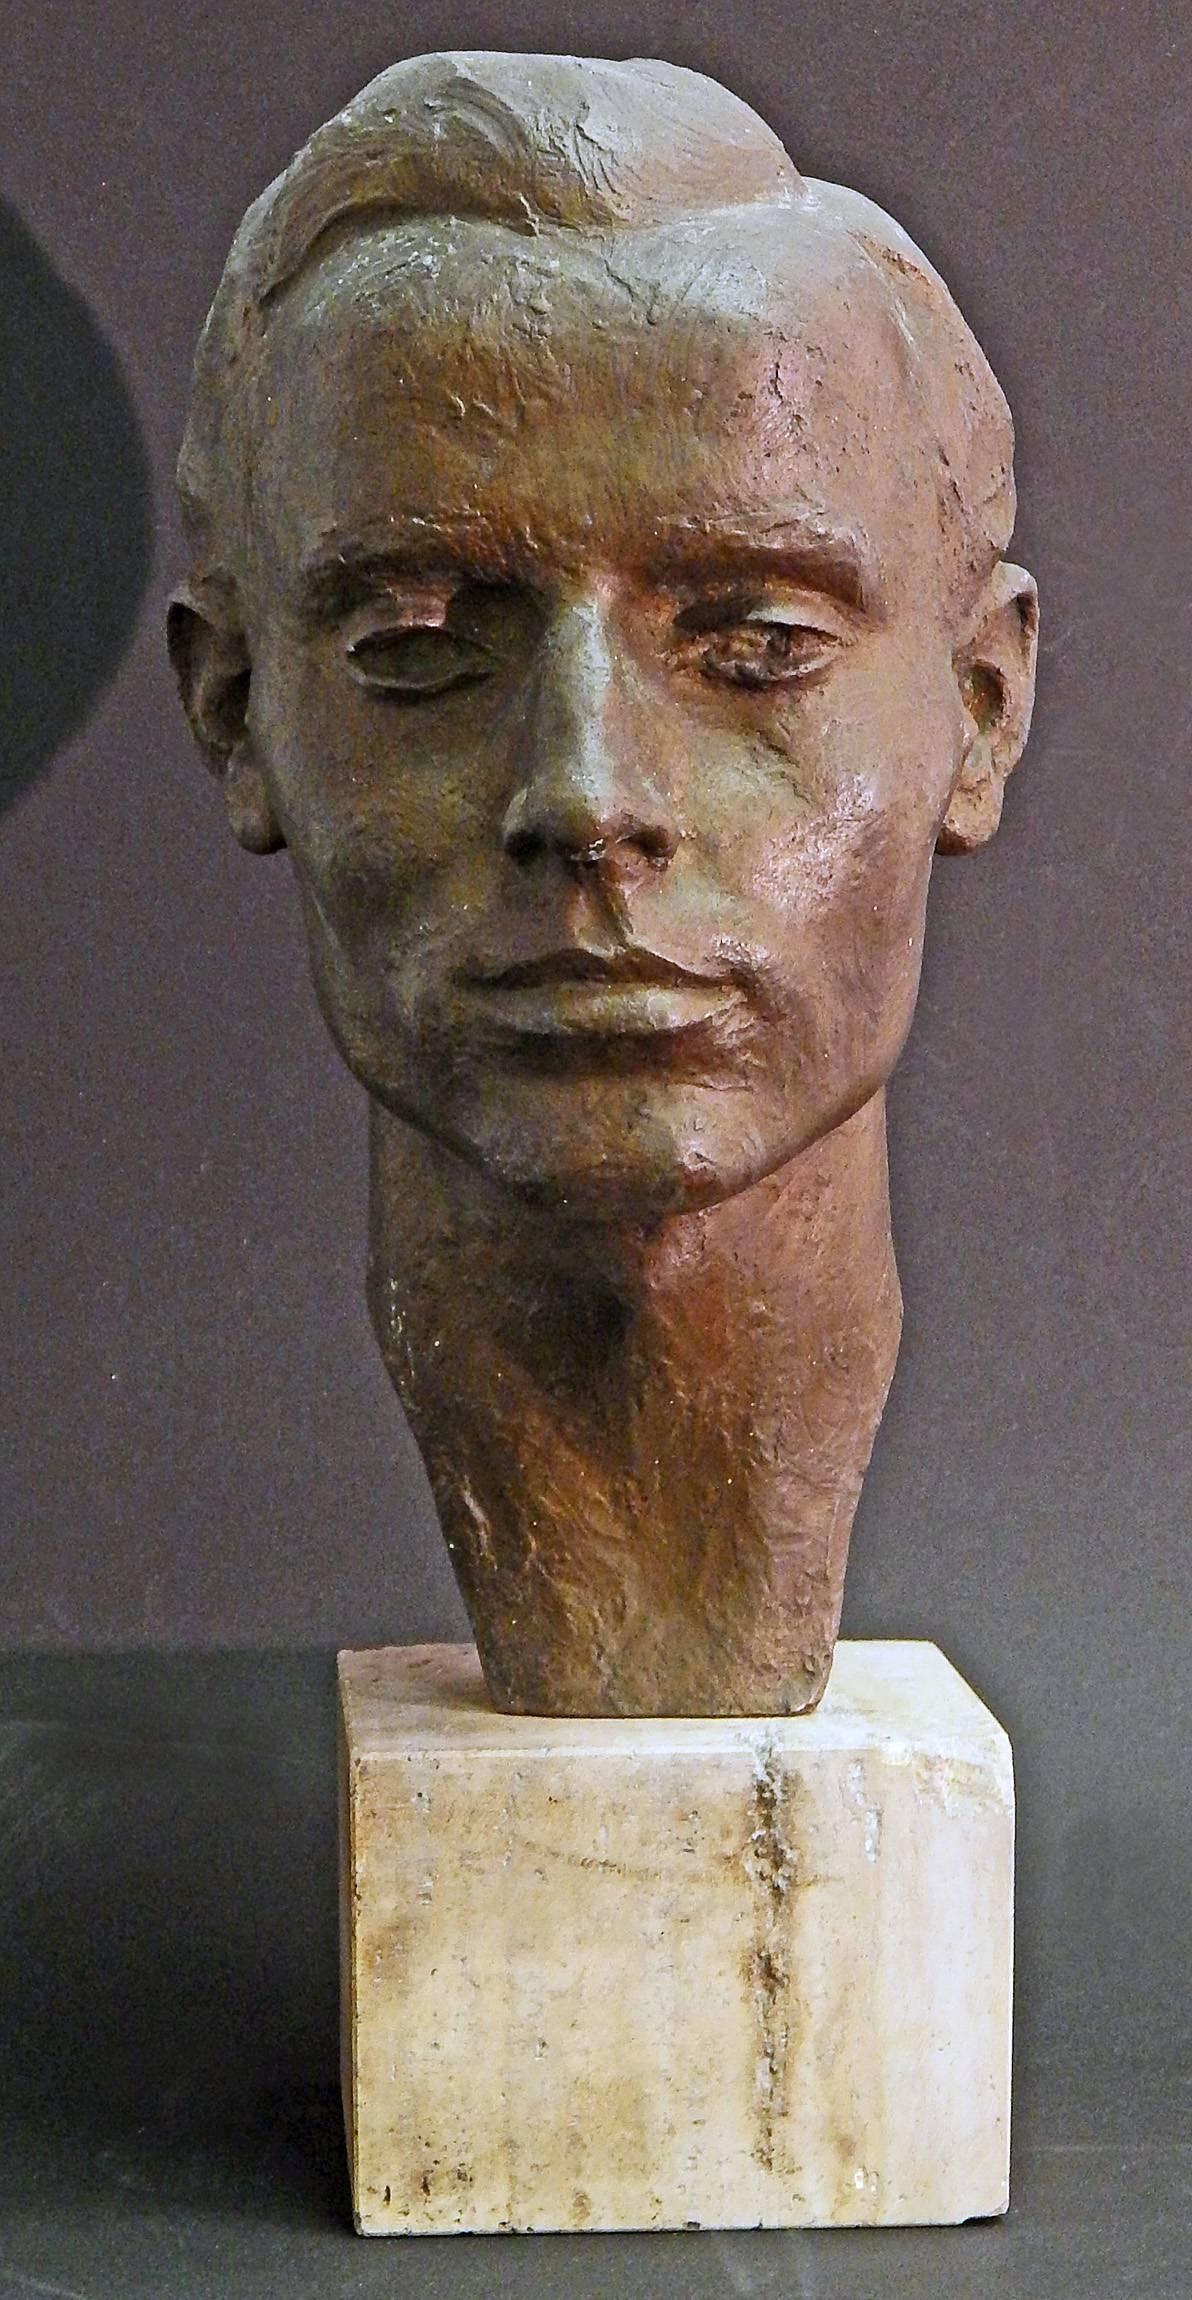 Sculpted by August Bischoff and cast by the famous Brandis foundry in Dusseldorf, Germany, which also cast bronzes by important artists such as Arno Breker, this unique bronze sculpture depicts a handsome young man with strong, well-defined